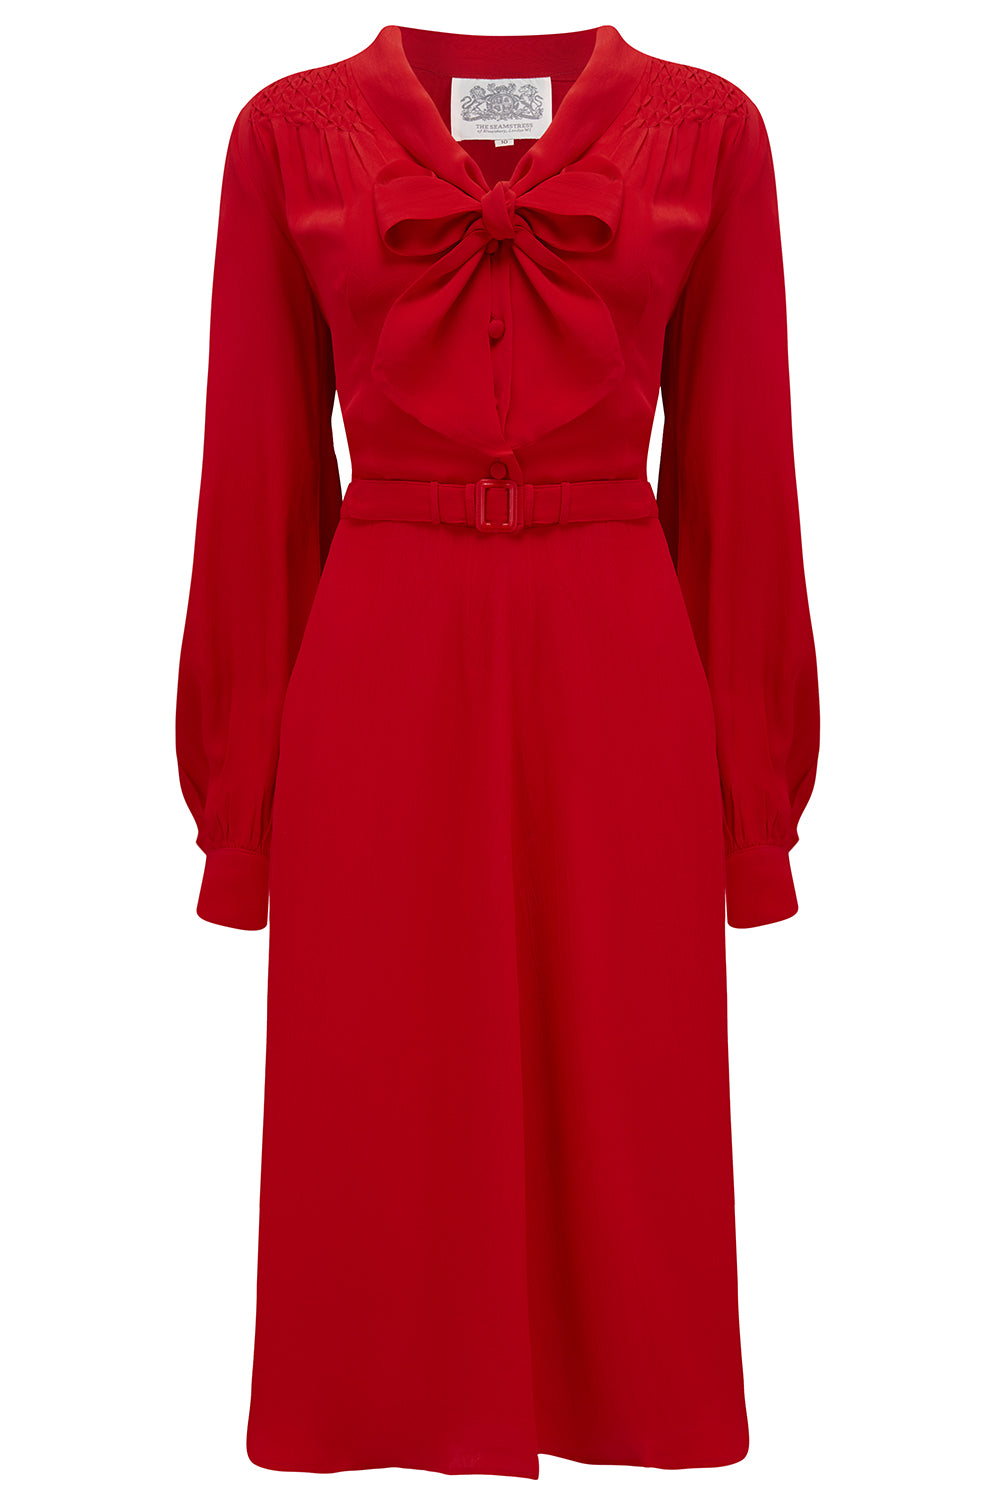 "Eva" Dress in 40s Red , Classic 1940's Style Long Sleeve Dress with Pussy Bow Tie Neck - CC41, Goodwood Revival, Twinwood Festival, Viva Las Vegas Rockabilly Weekend Rock n Romance The Seamstress Of Bloomsbury